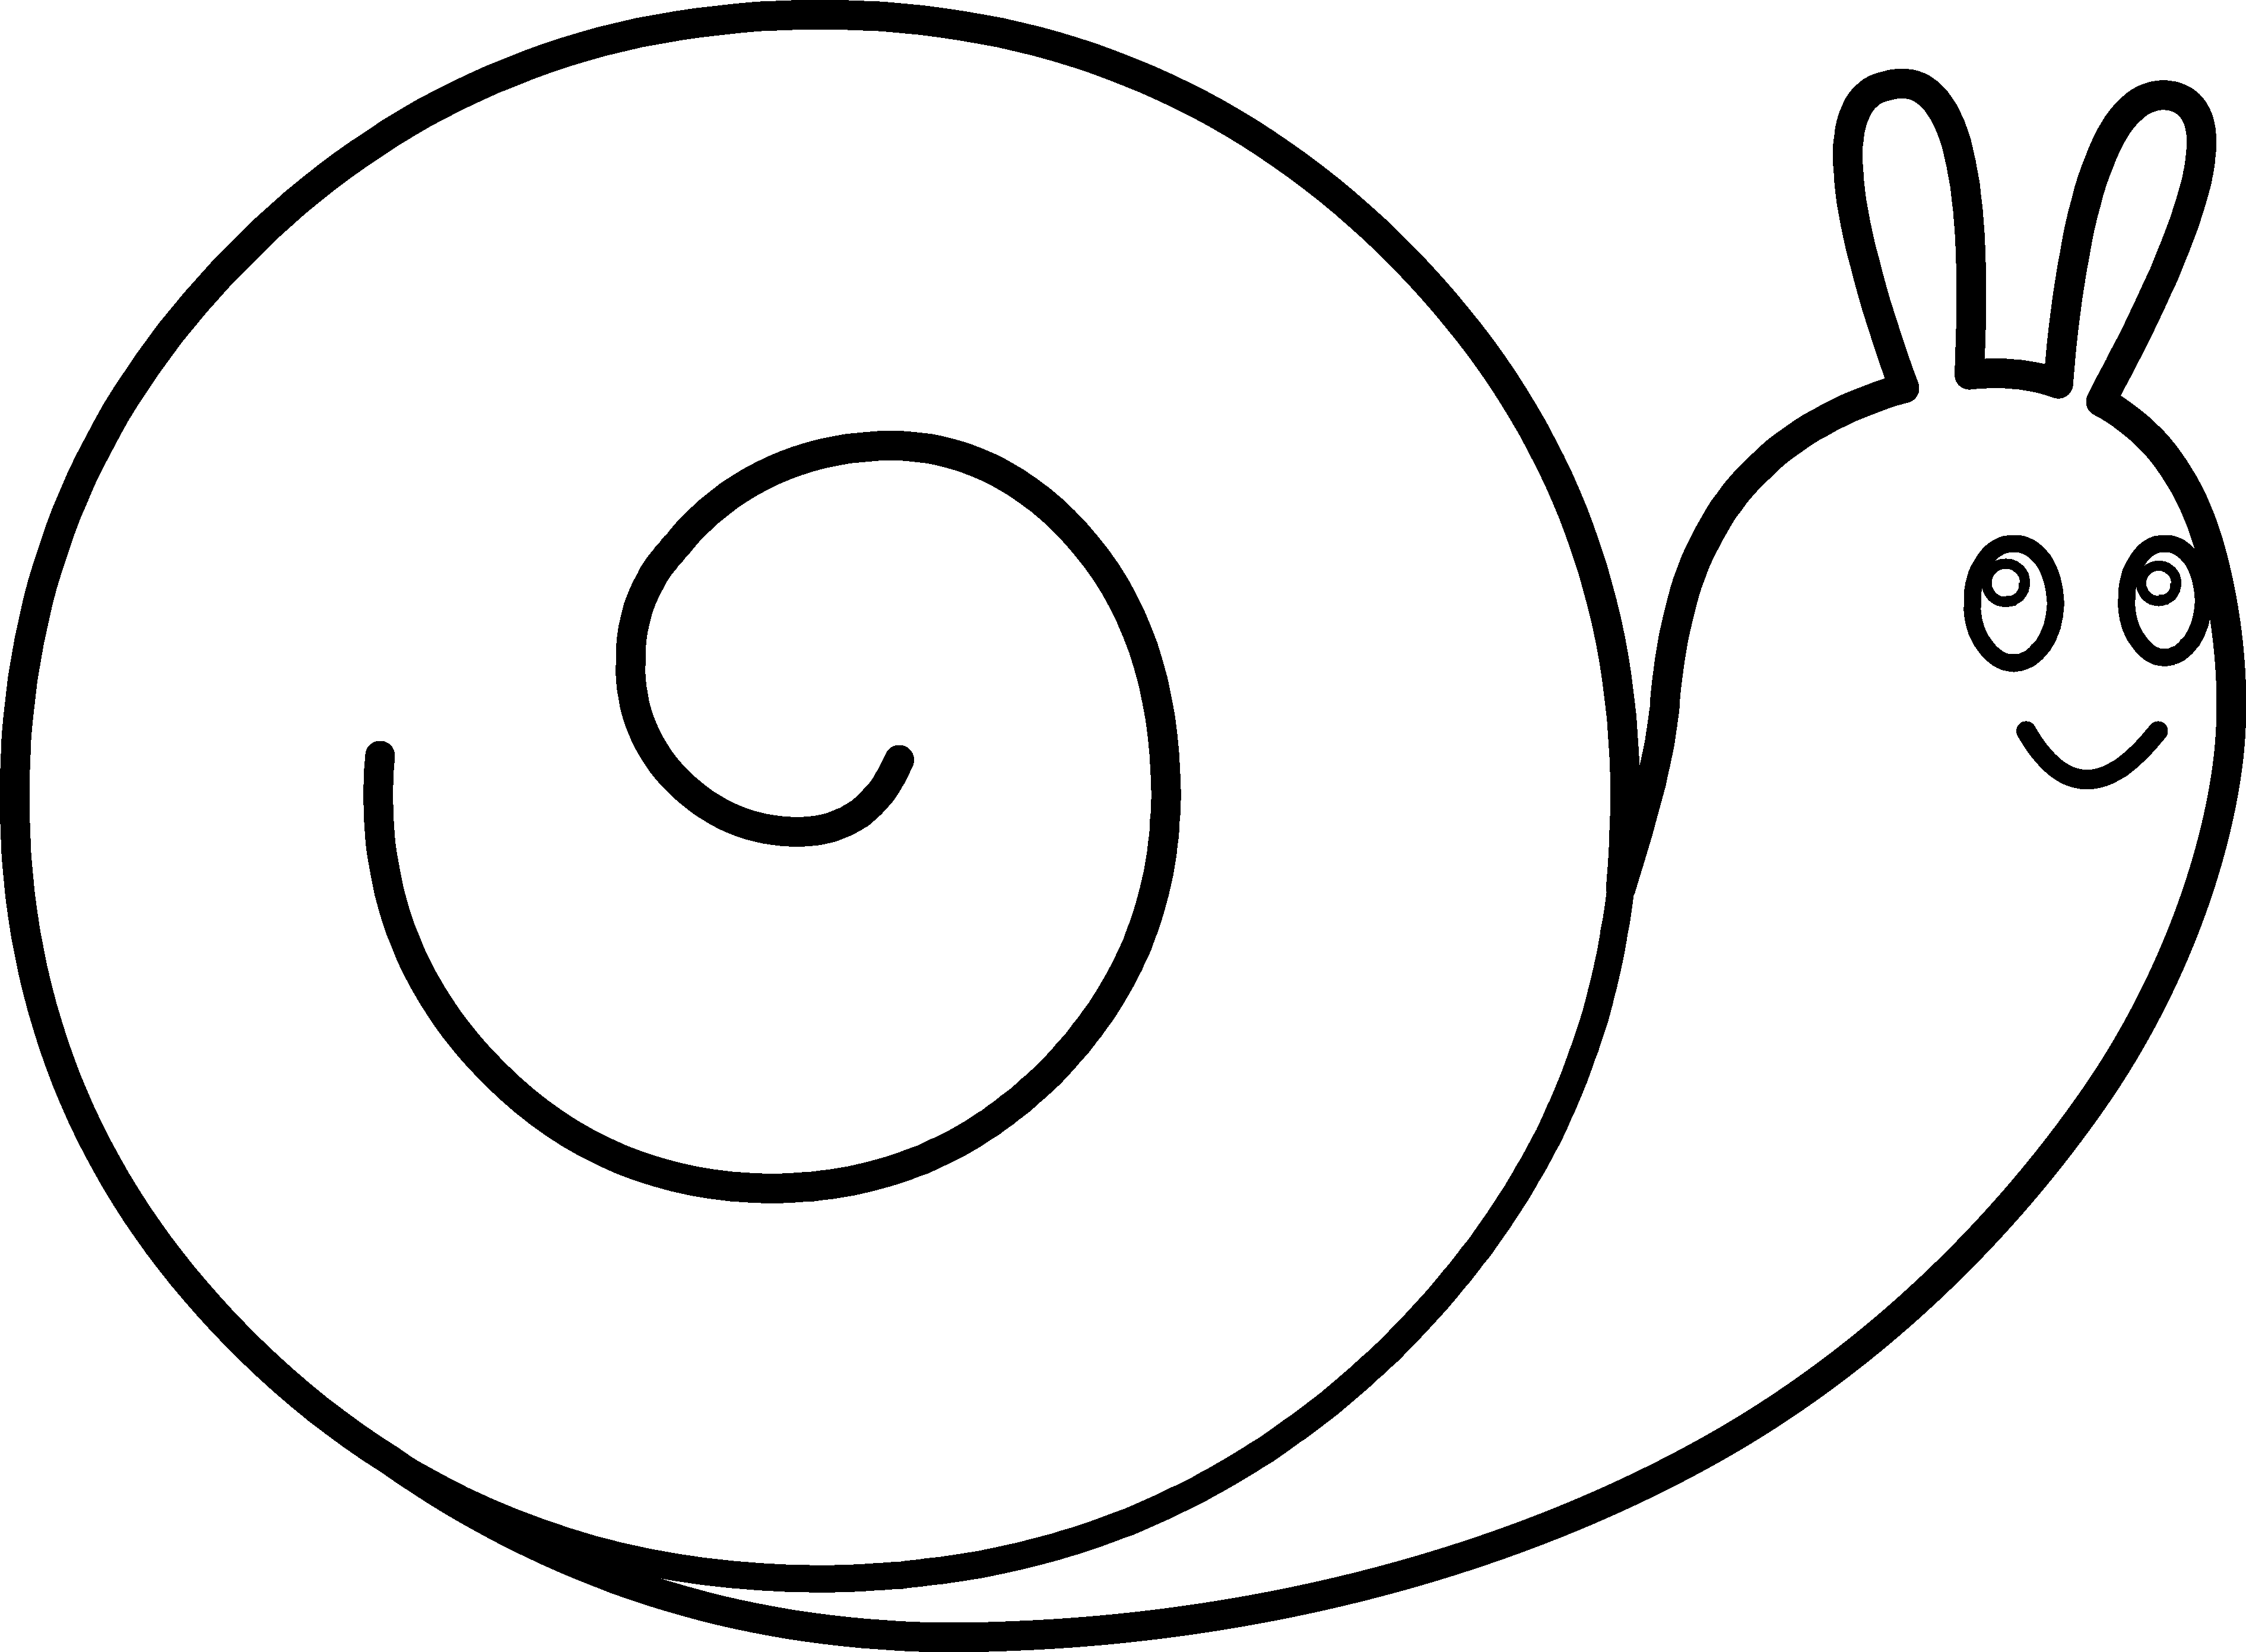 Black and White Snail on a Le